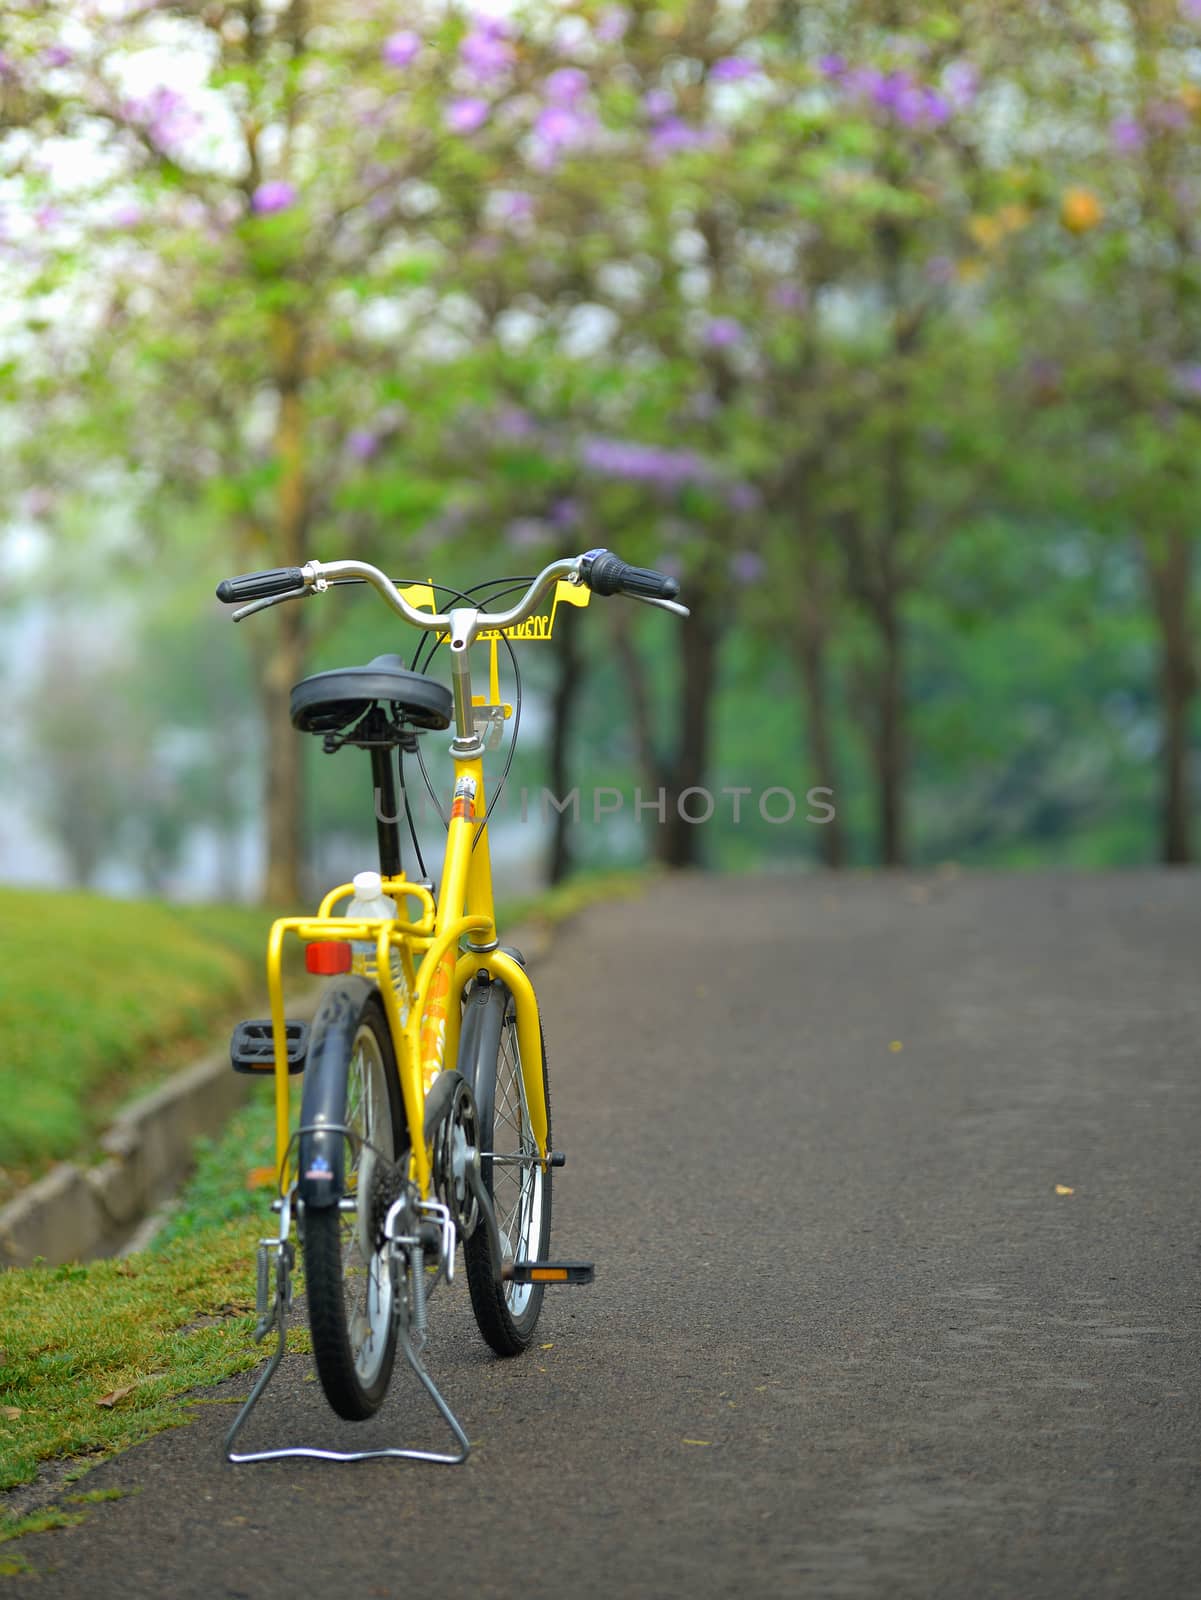  bicycle in the garden road  by sommai